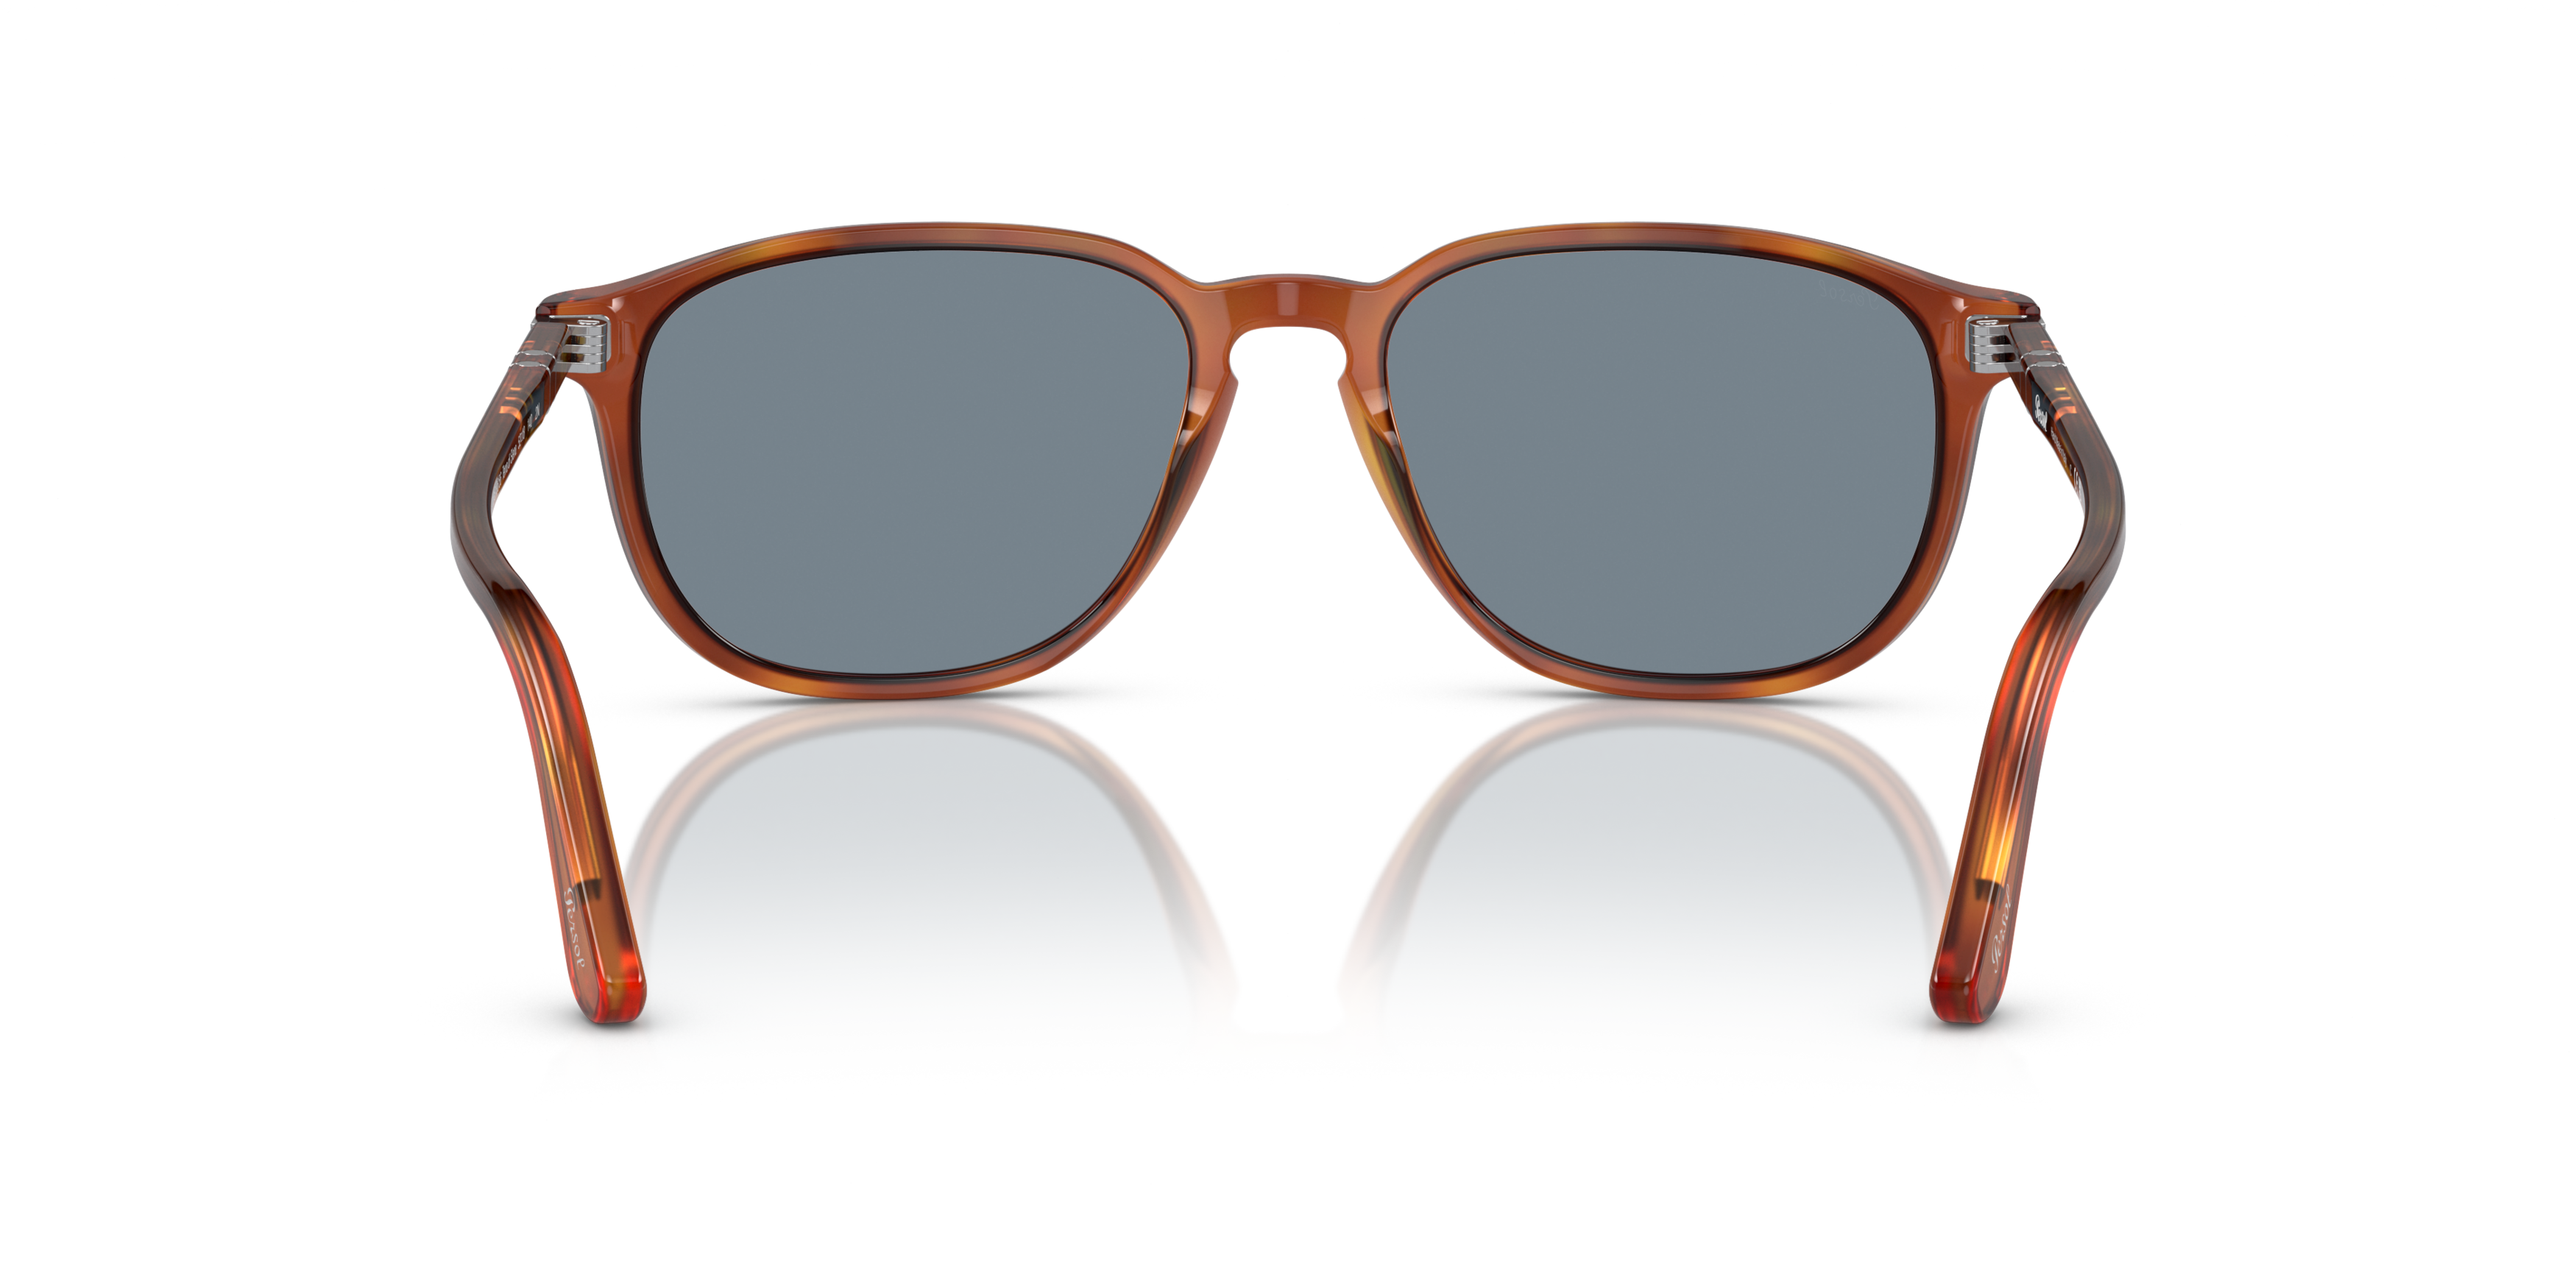 [products.image.detail02] Persol 0PO3019S 96/56